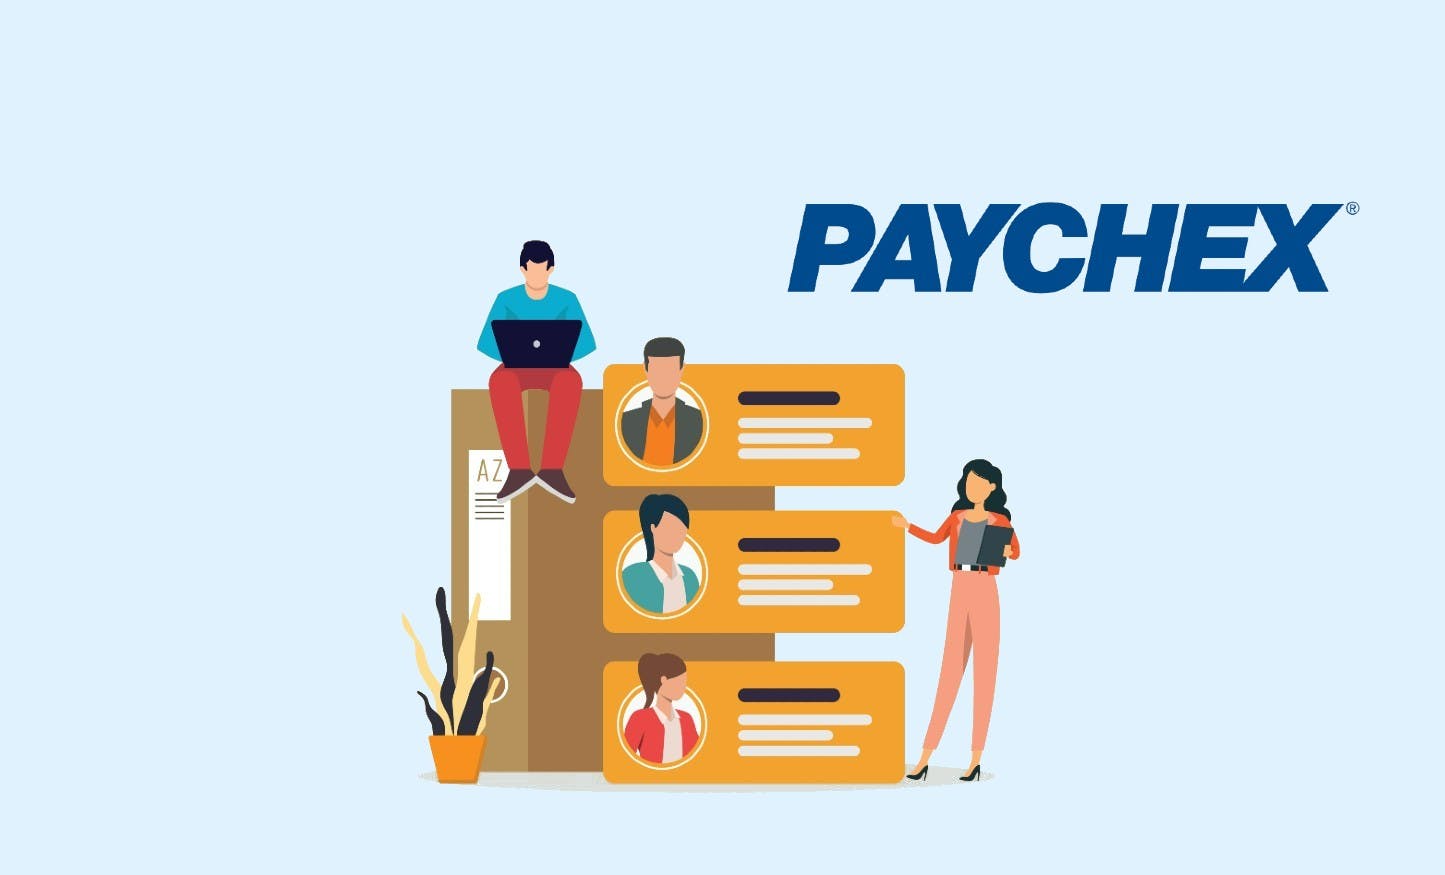 Paychex Payroll: Features, Plans, and Benefits